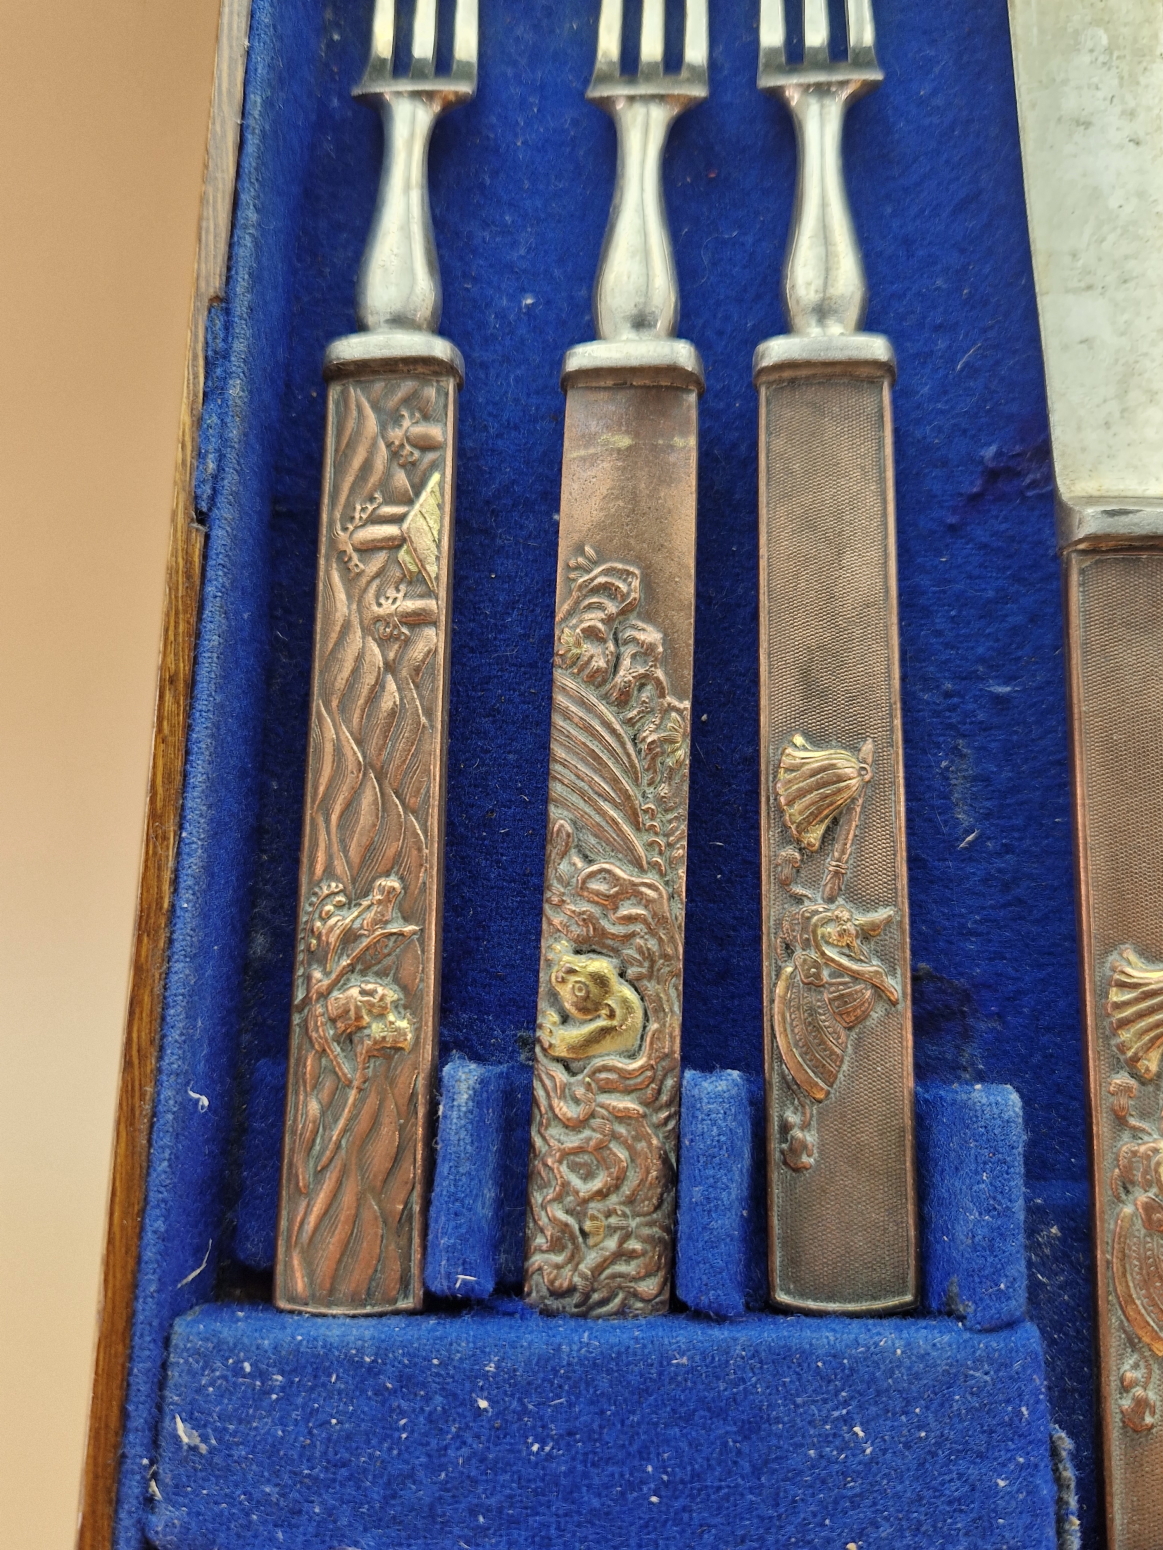 A TRAY OF SIX FRUIT KNIVES AND FORKS, EACH WITH PARCEL GILT COPPER JAPANESE KOZUKA HANDLES - Image 2 of 9